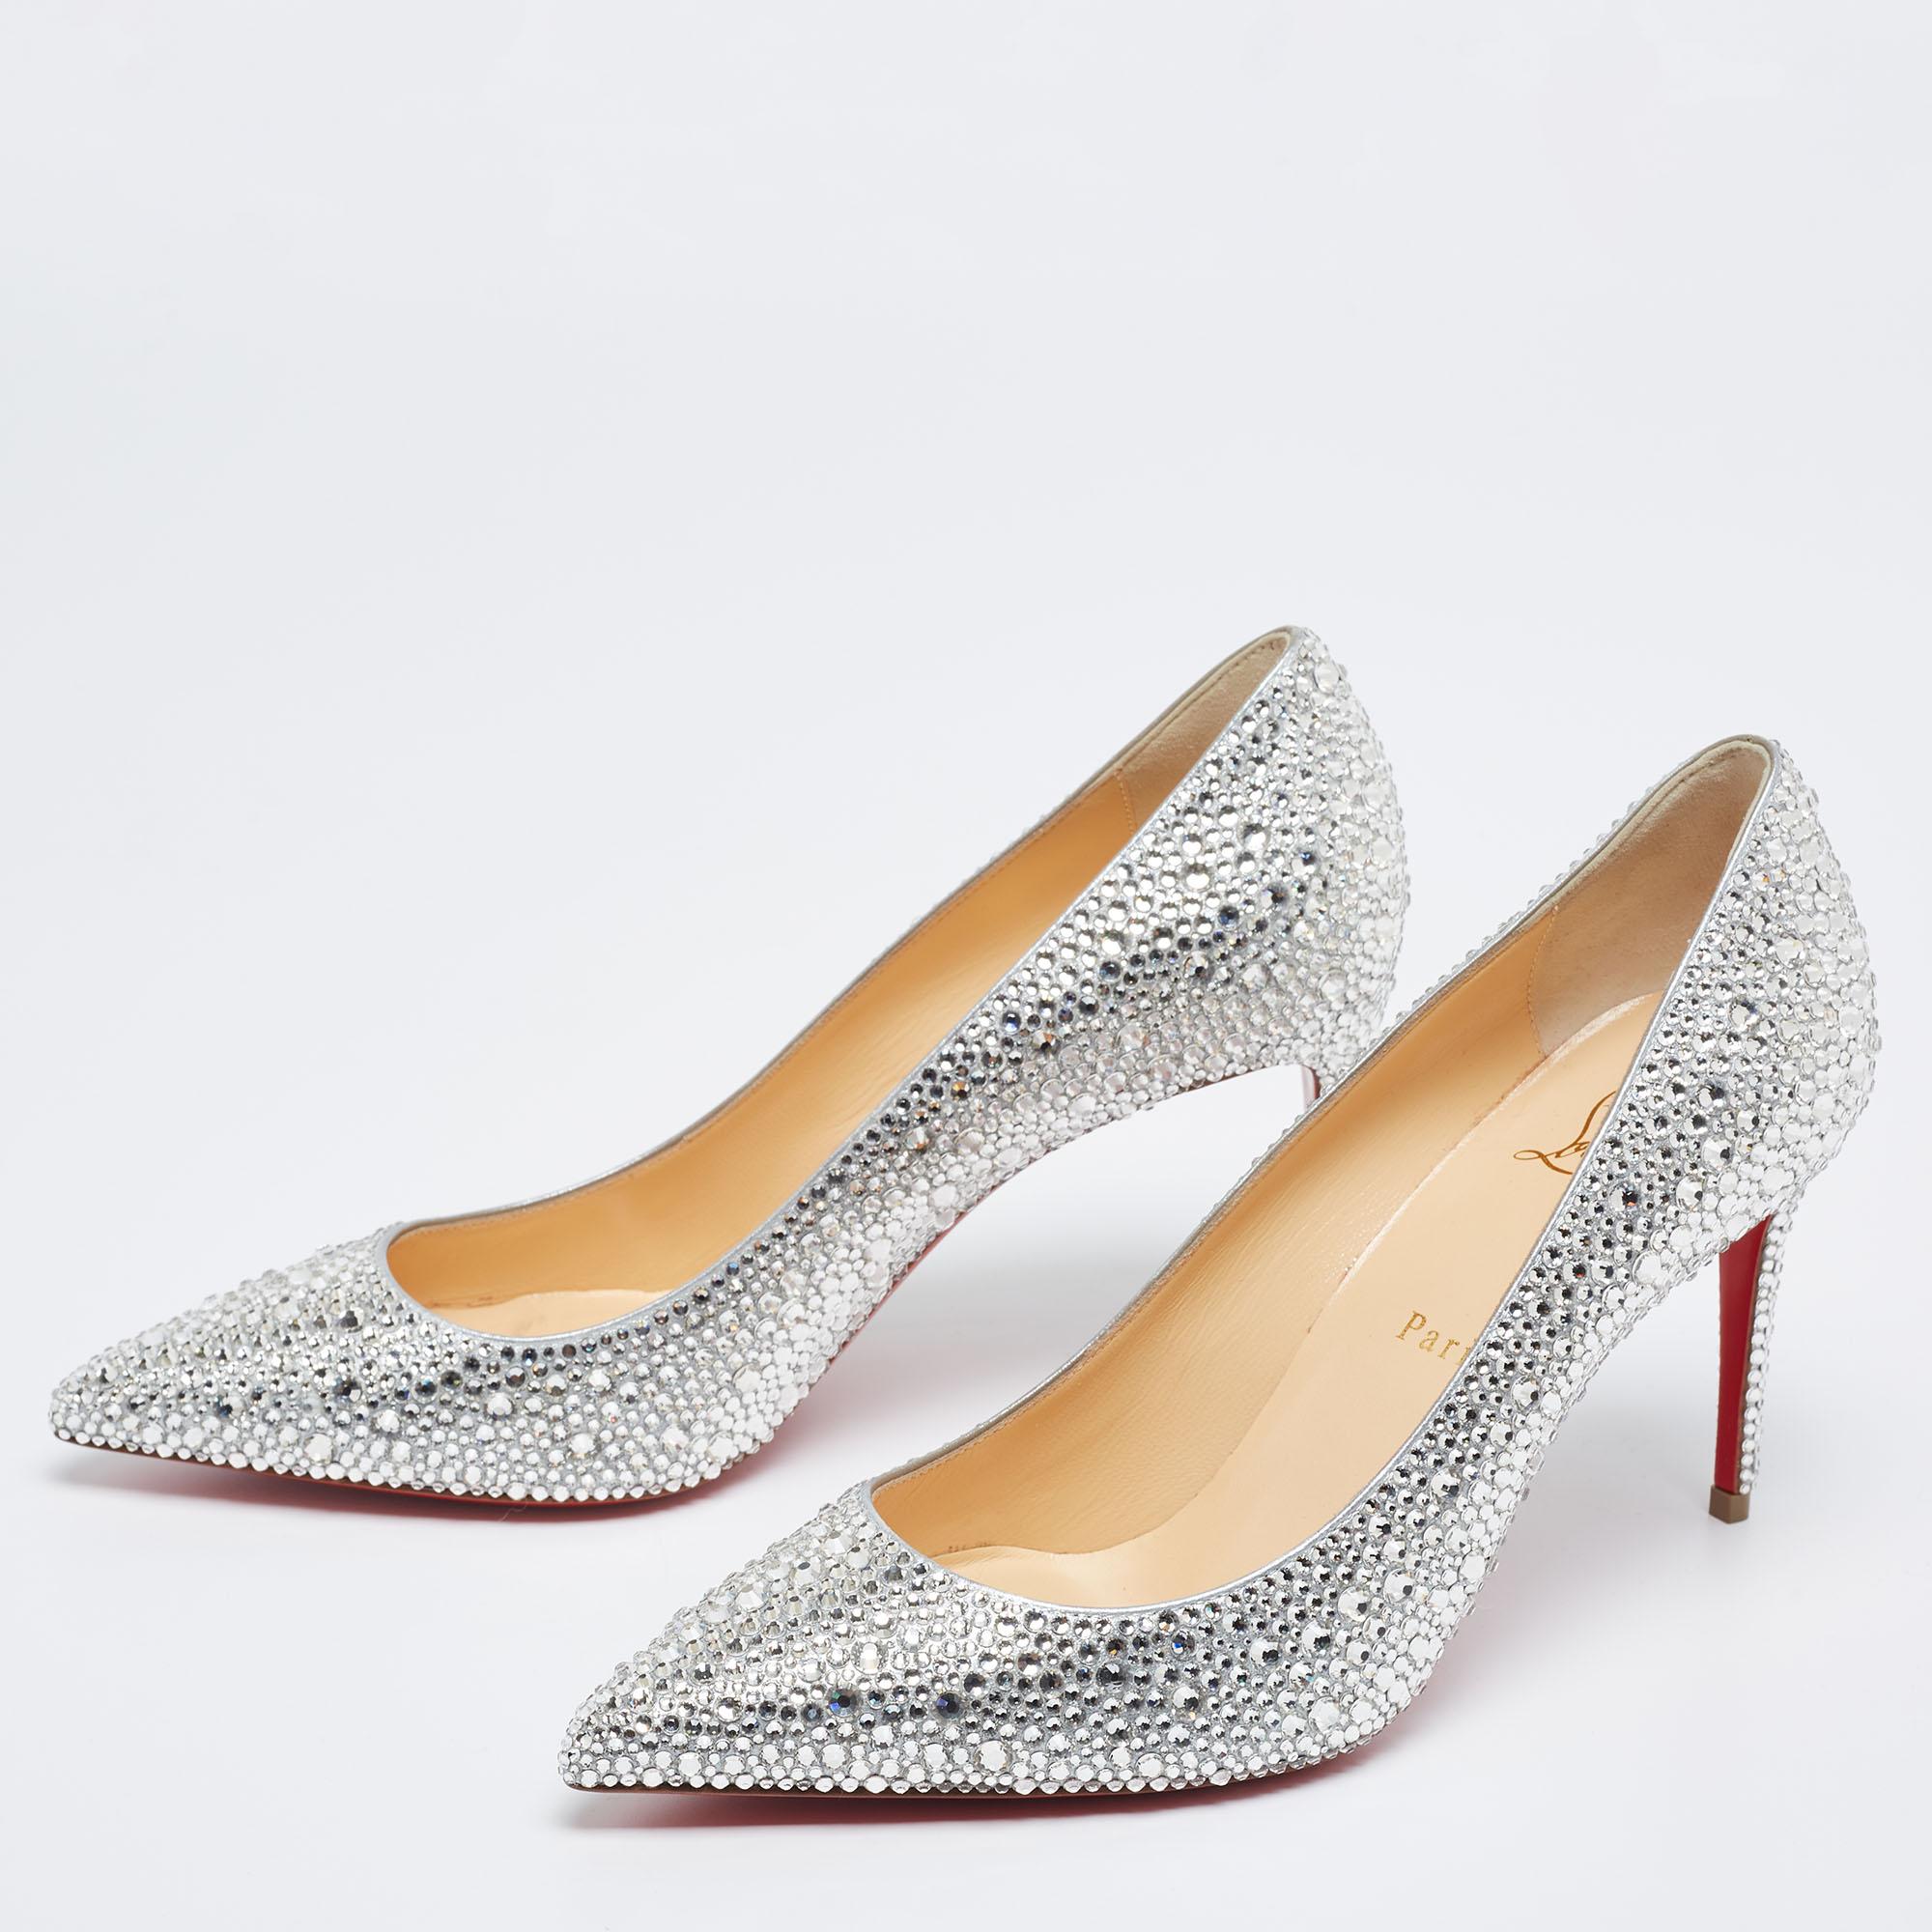 Christian Louboutin Silver Strass Leather Kate Pumps Size 38 2